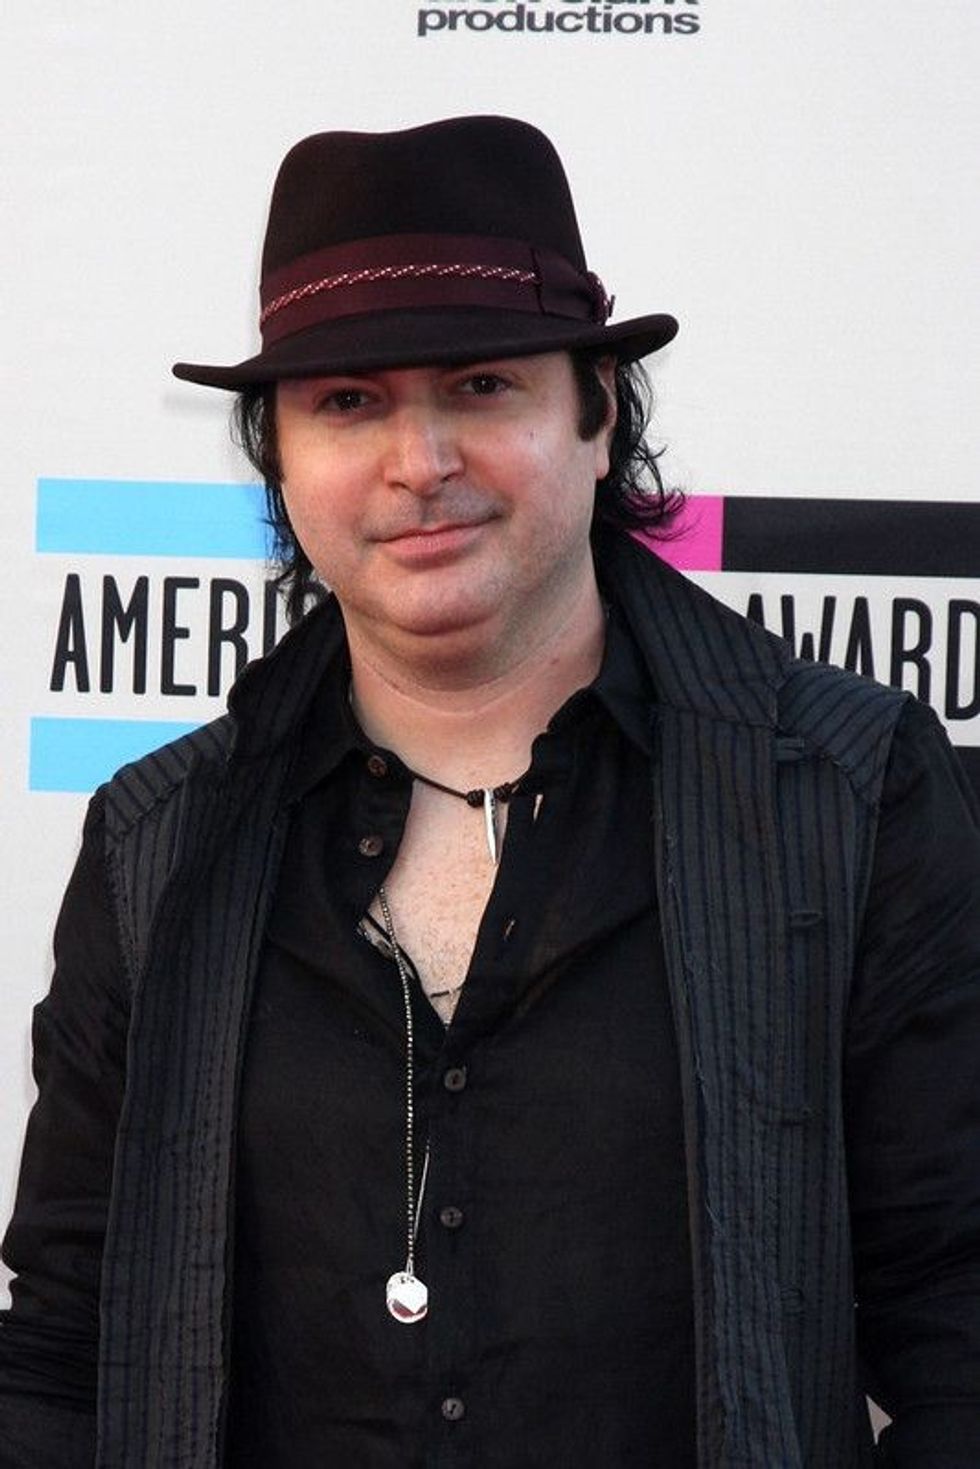 Kevin Rudolf is a singer, record producer, and songwriter, born in New York City.